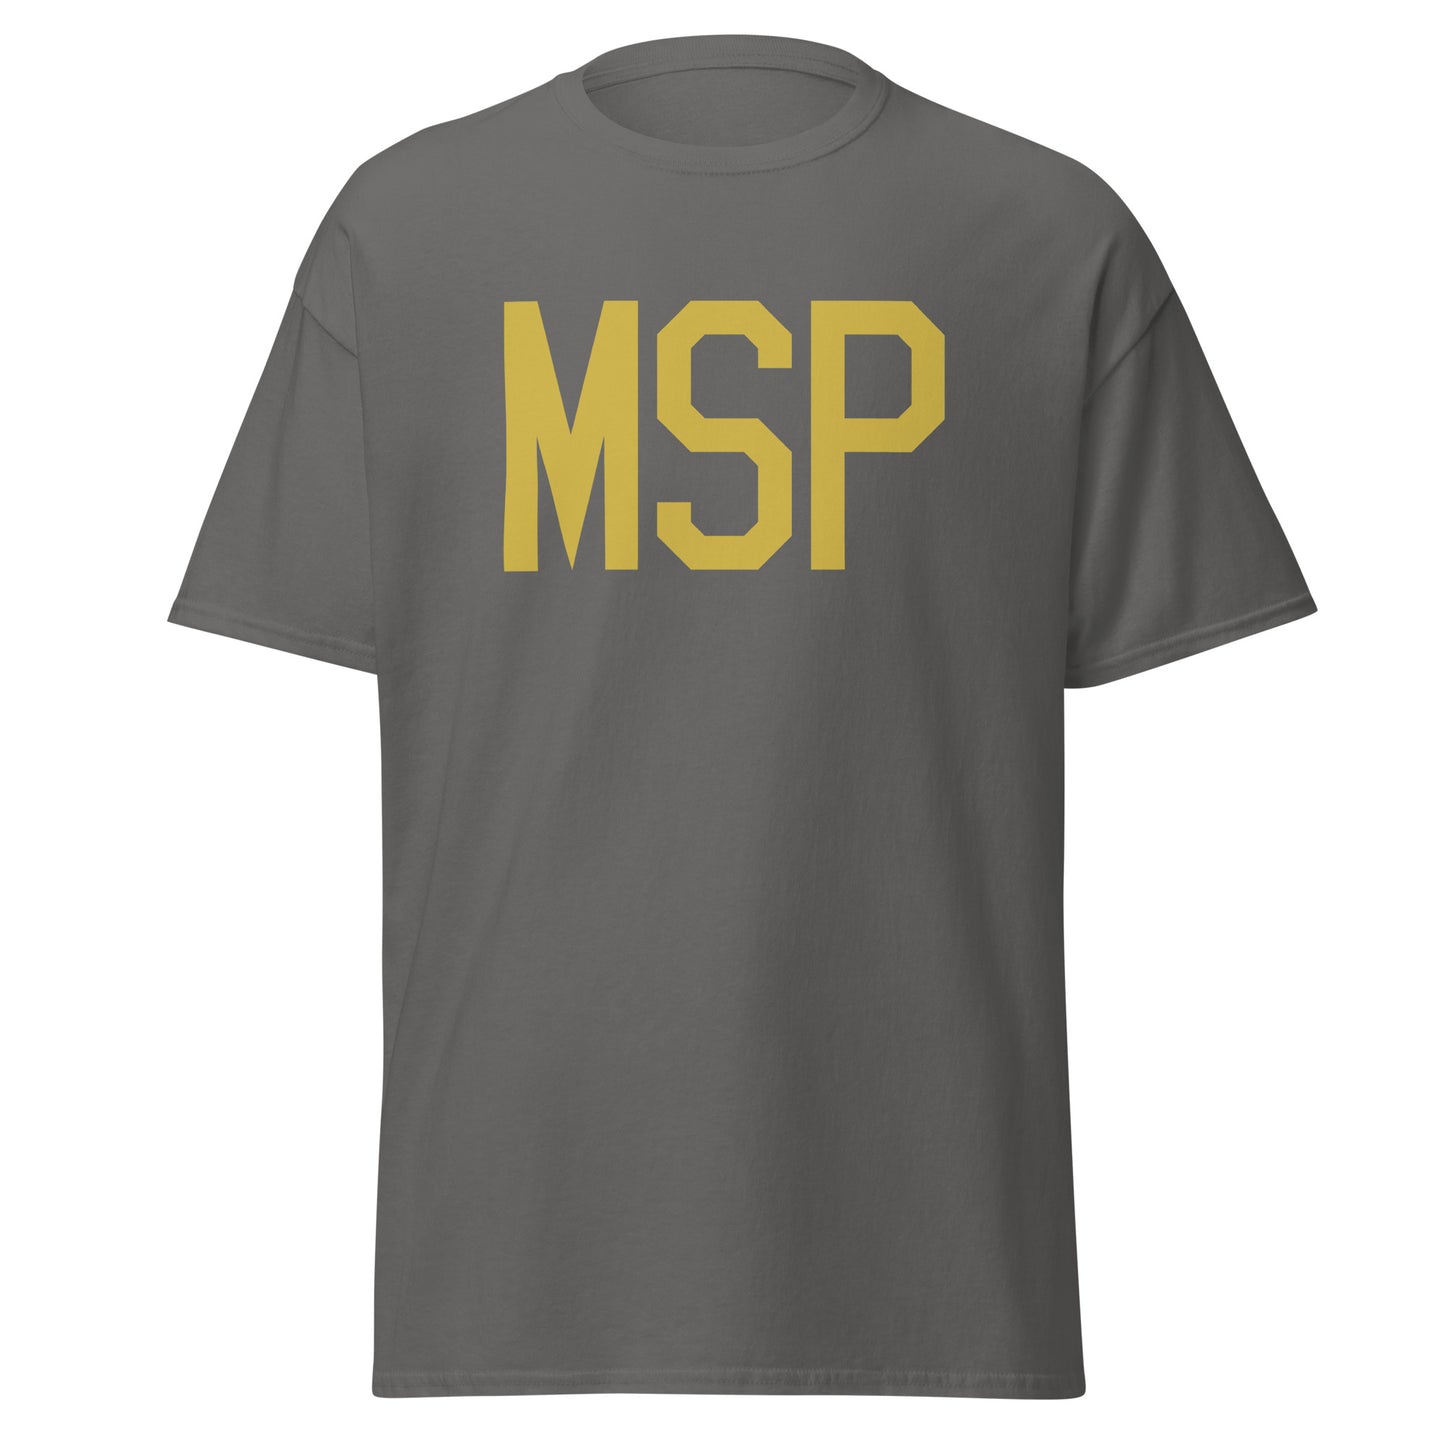 Aviation Enthusiast Men's Tee - Old Gold Graphic • MSP Minneapolis • YHM Designs - Image 05